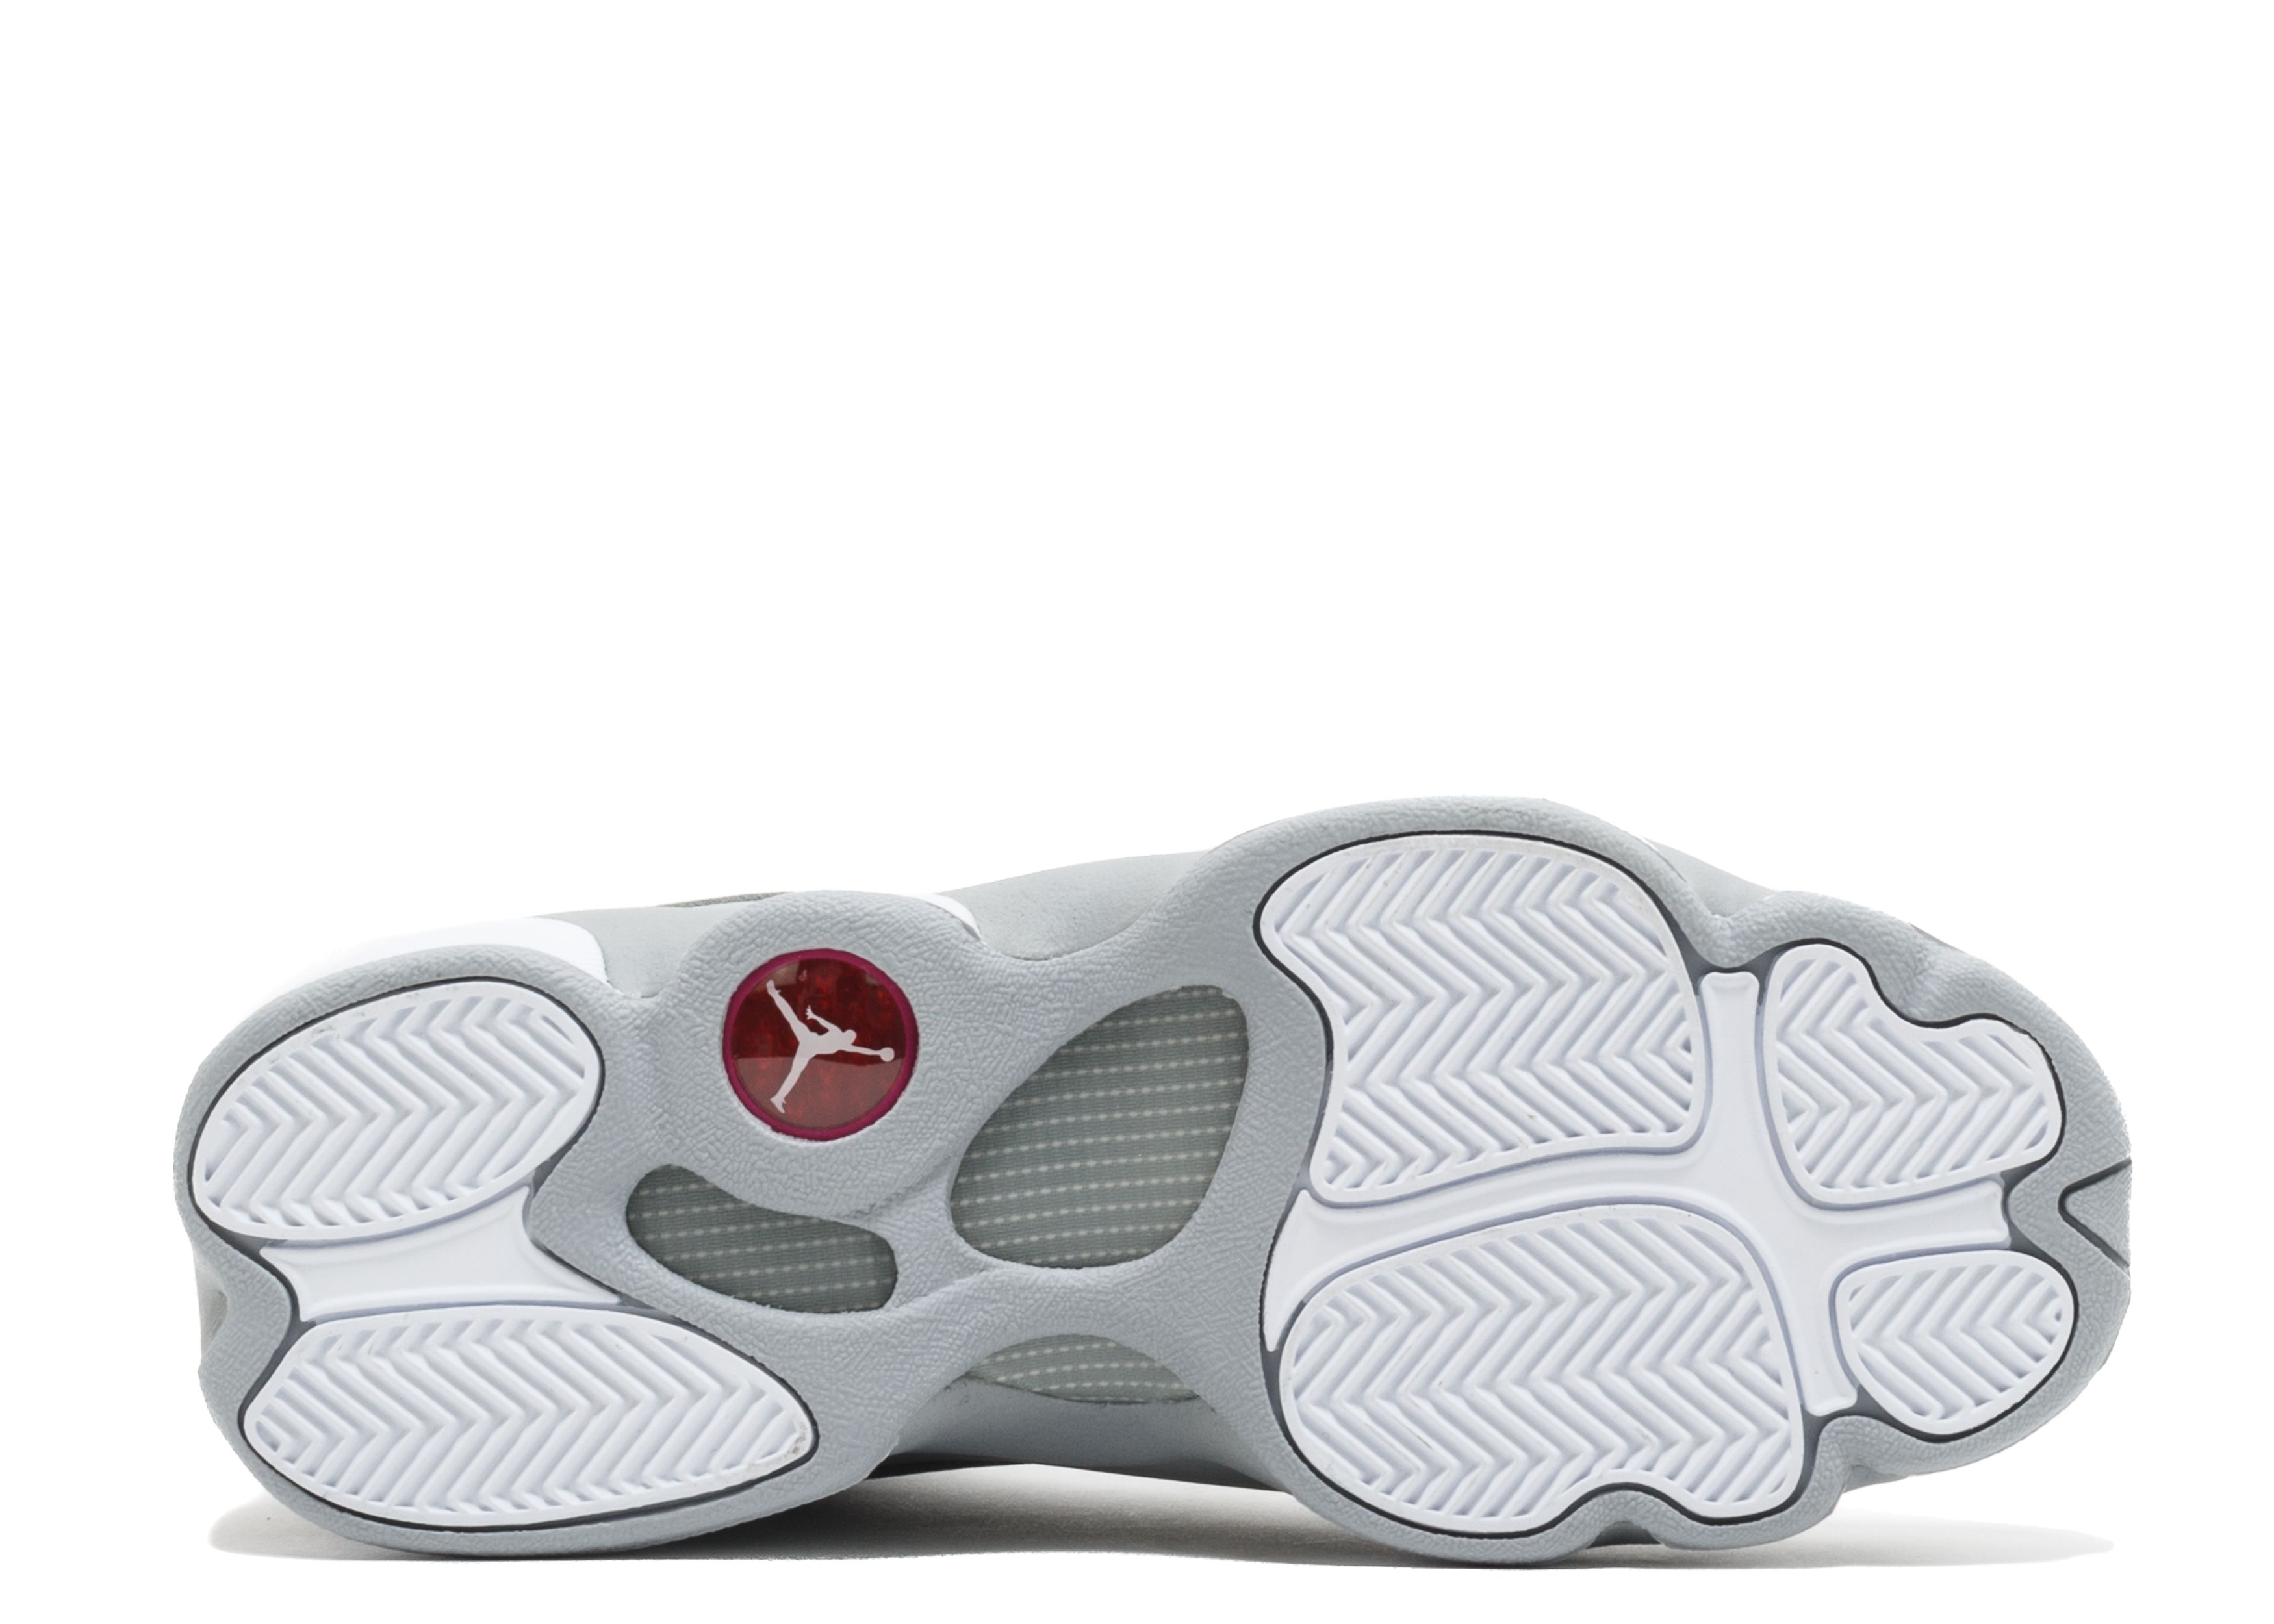 The Air Jordan 13 'Wolf Grey' Arrives August 5th – CrepProtect